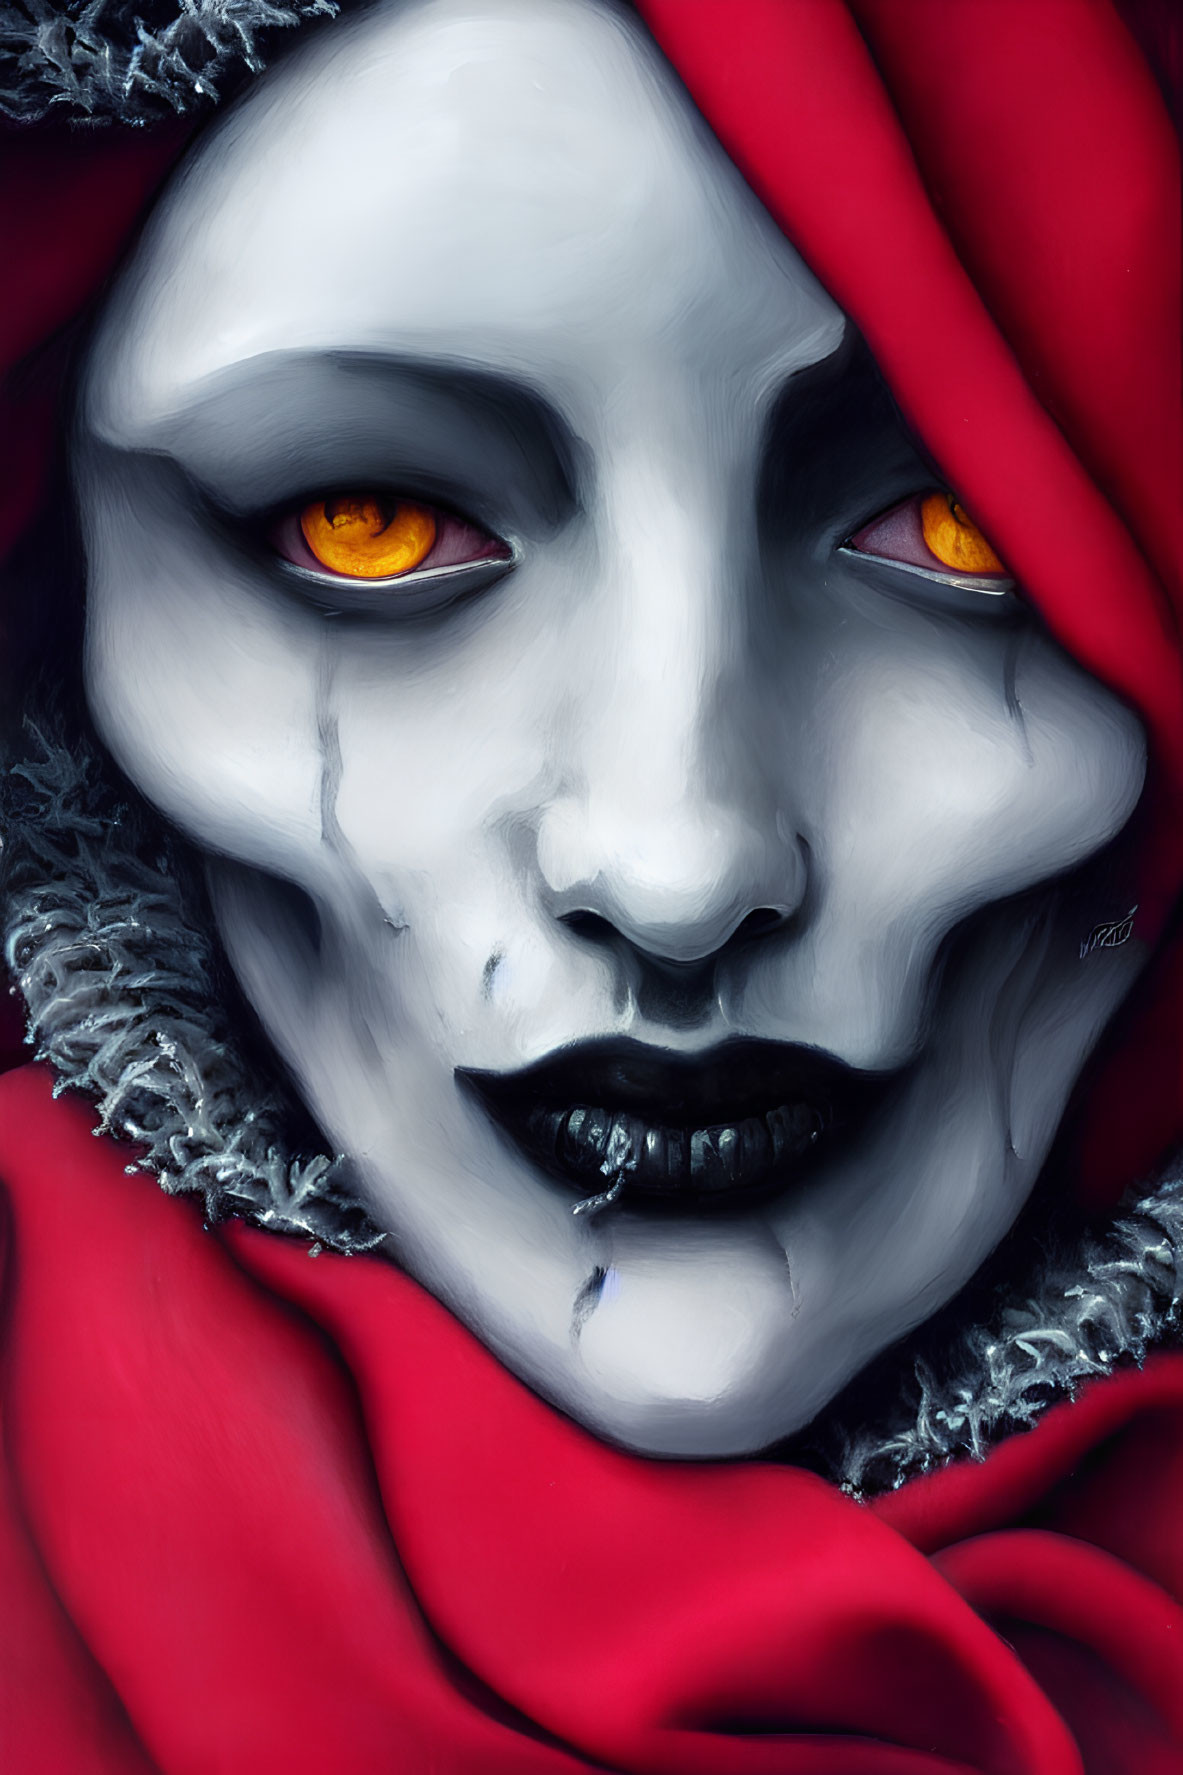 Person with dramatic skull-like makeup, orange eyes, and red hood.